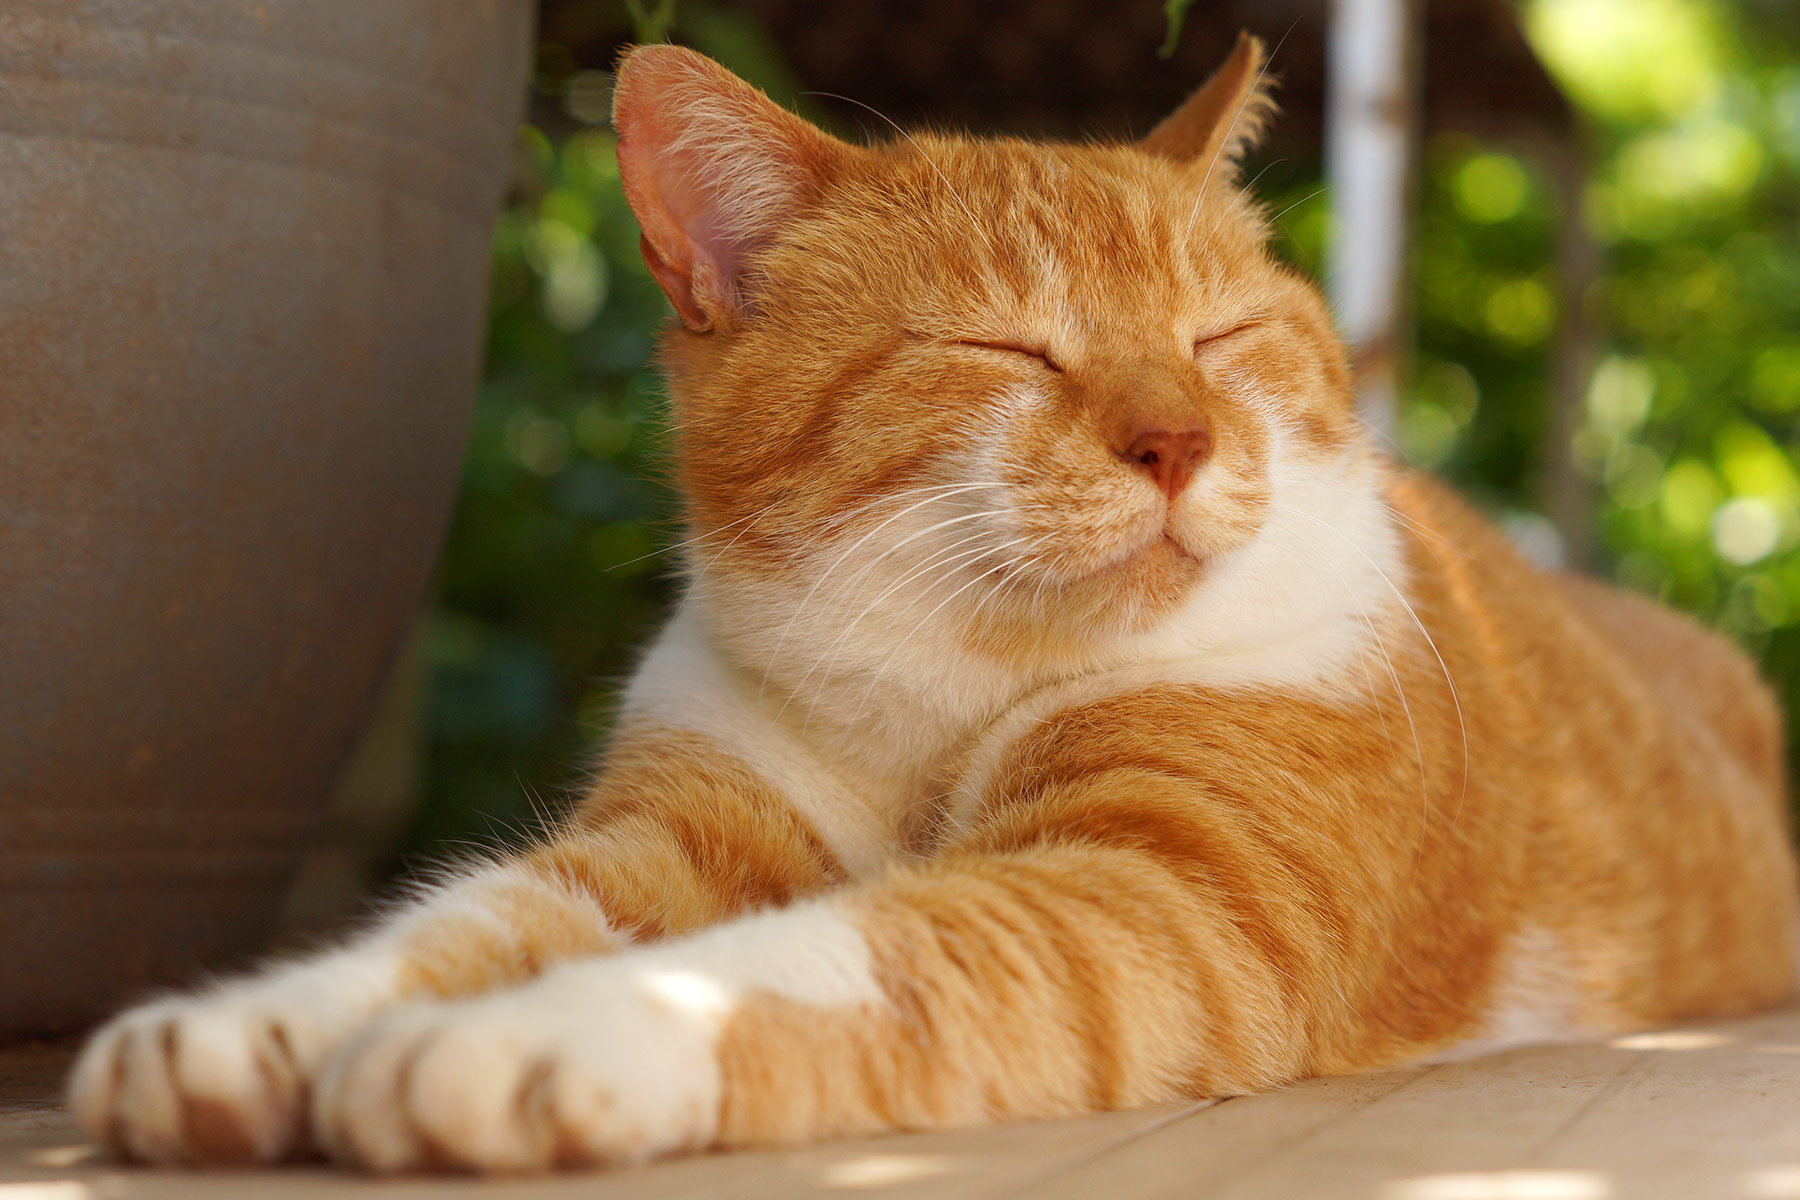 1800x1200_cat_relaxing_on_patio_other.jpg